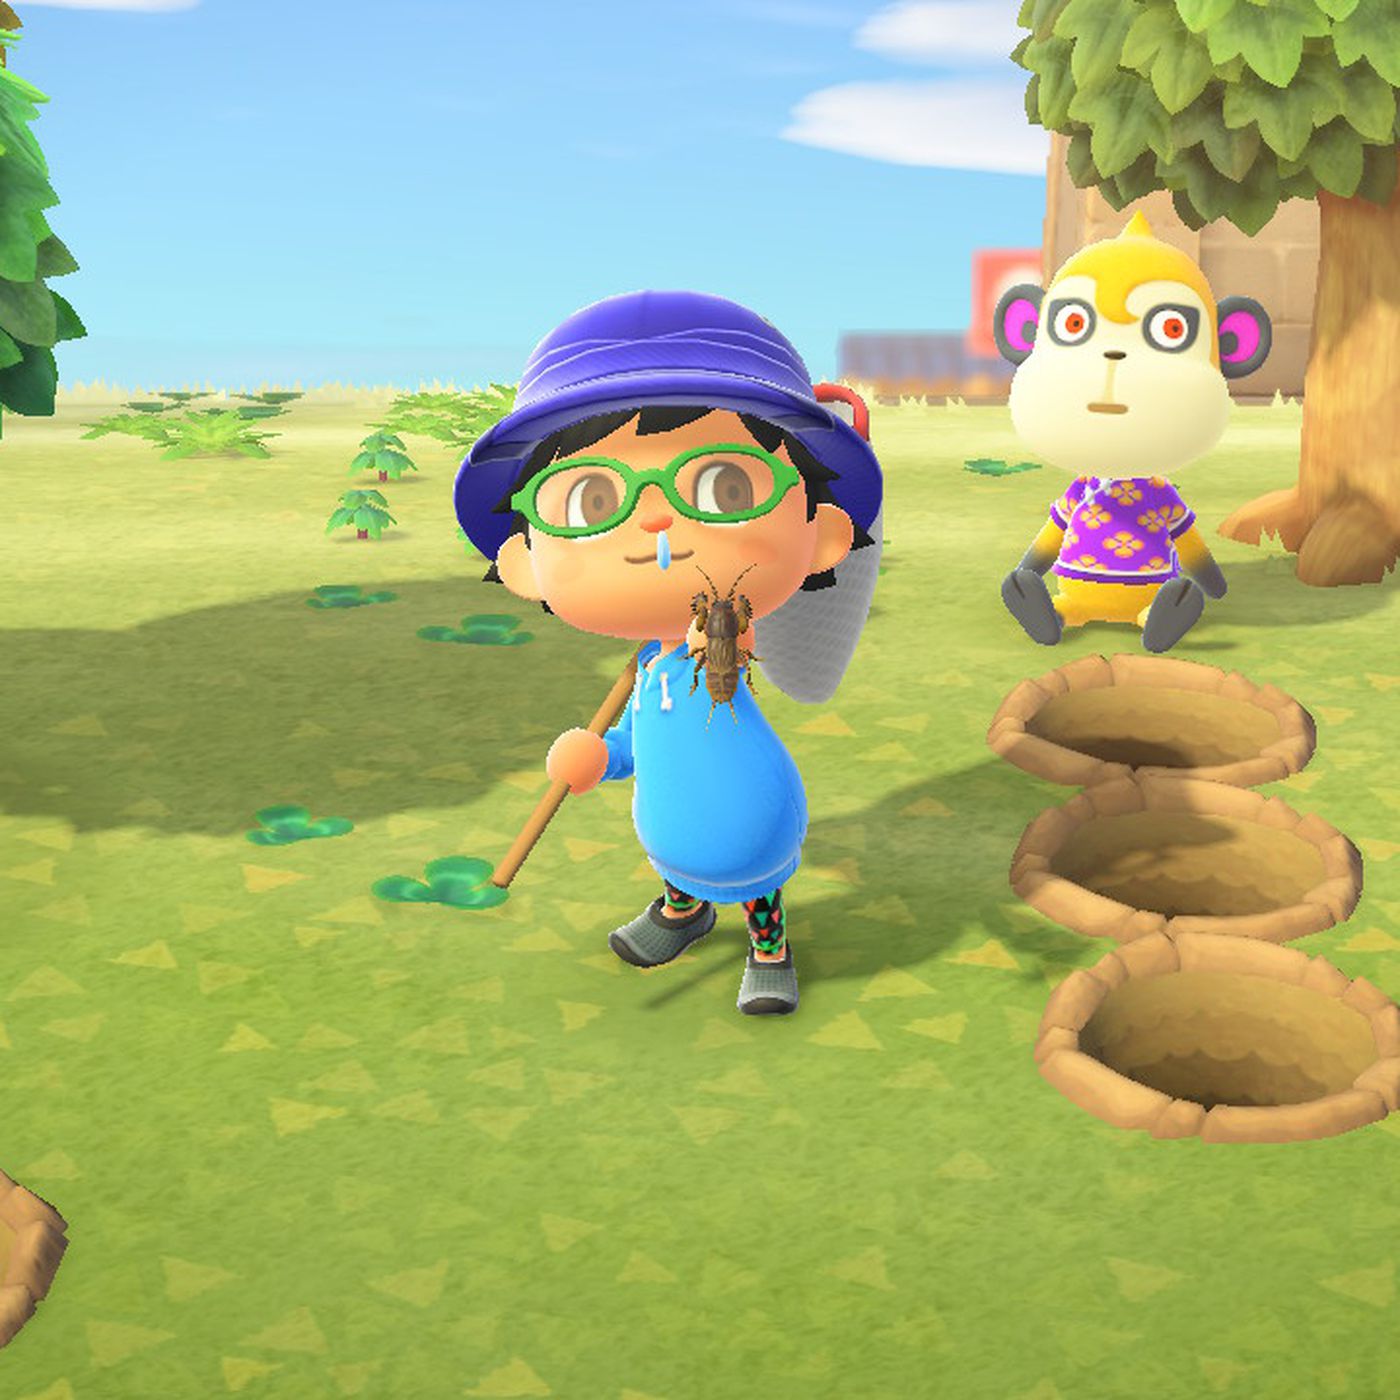 How To Catch A Mole Cricket In Animal Crossing New Horizons Switch Polygon